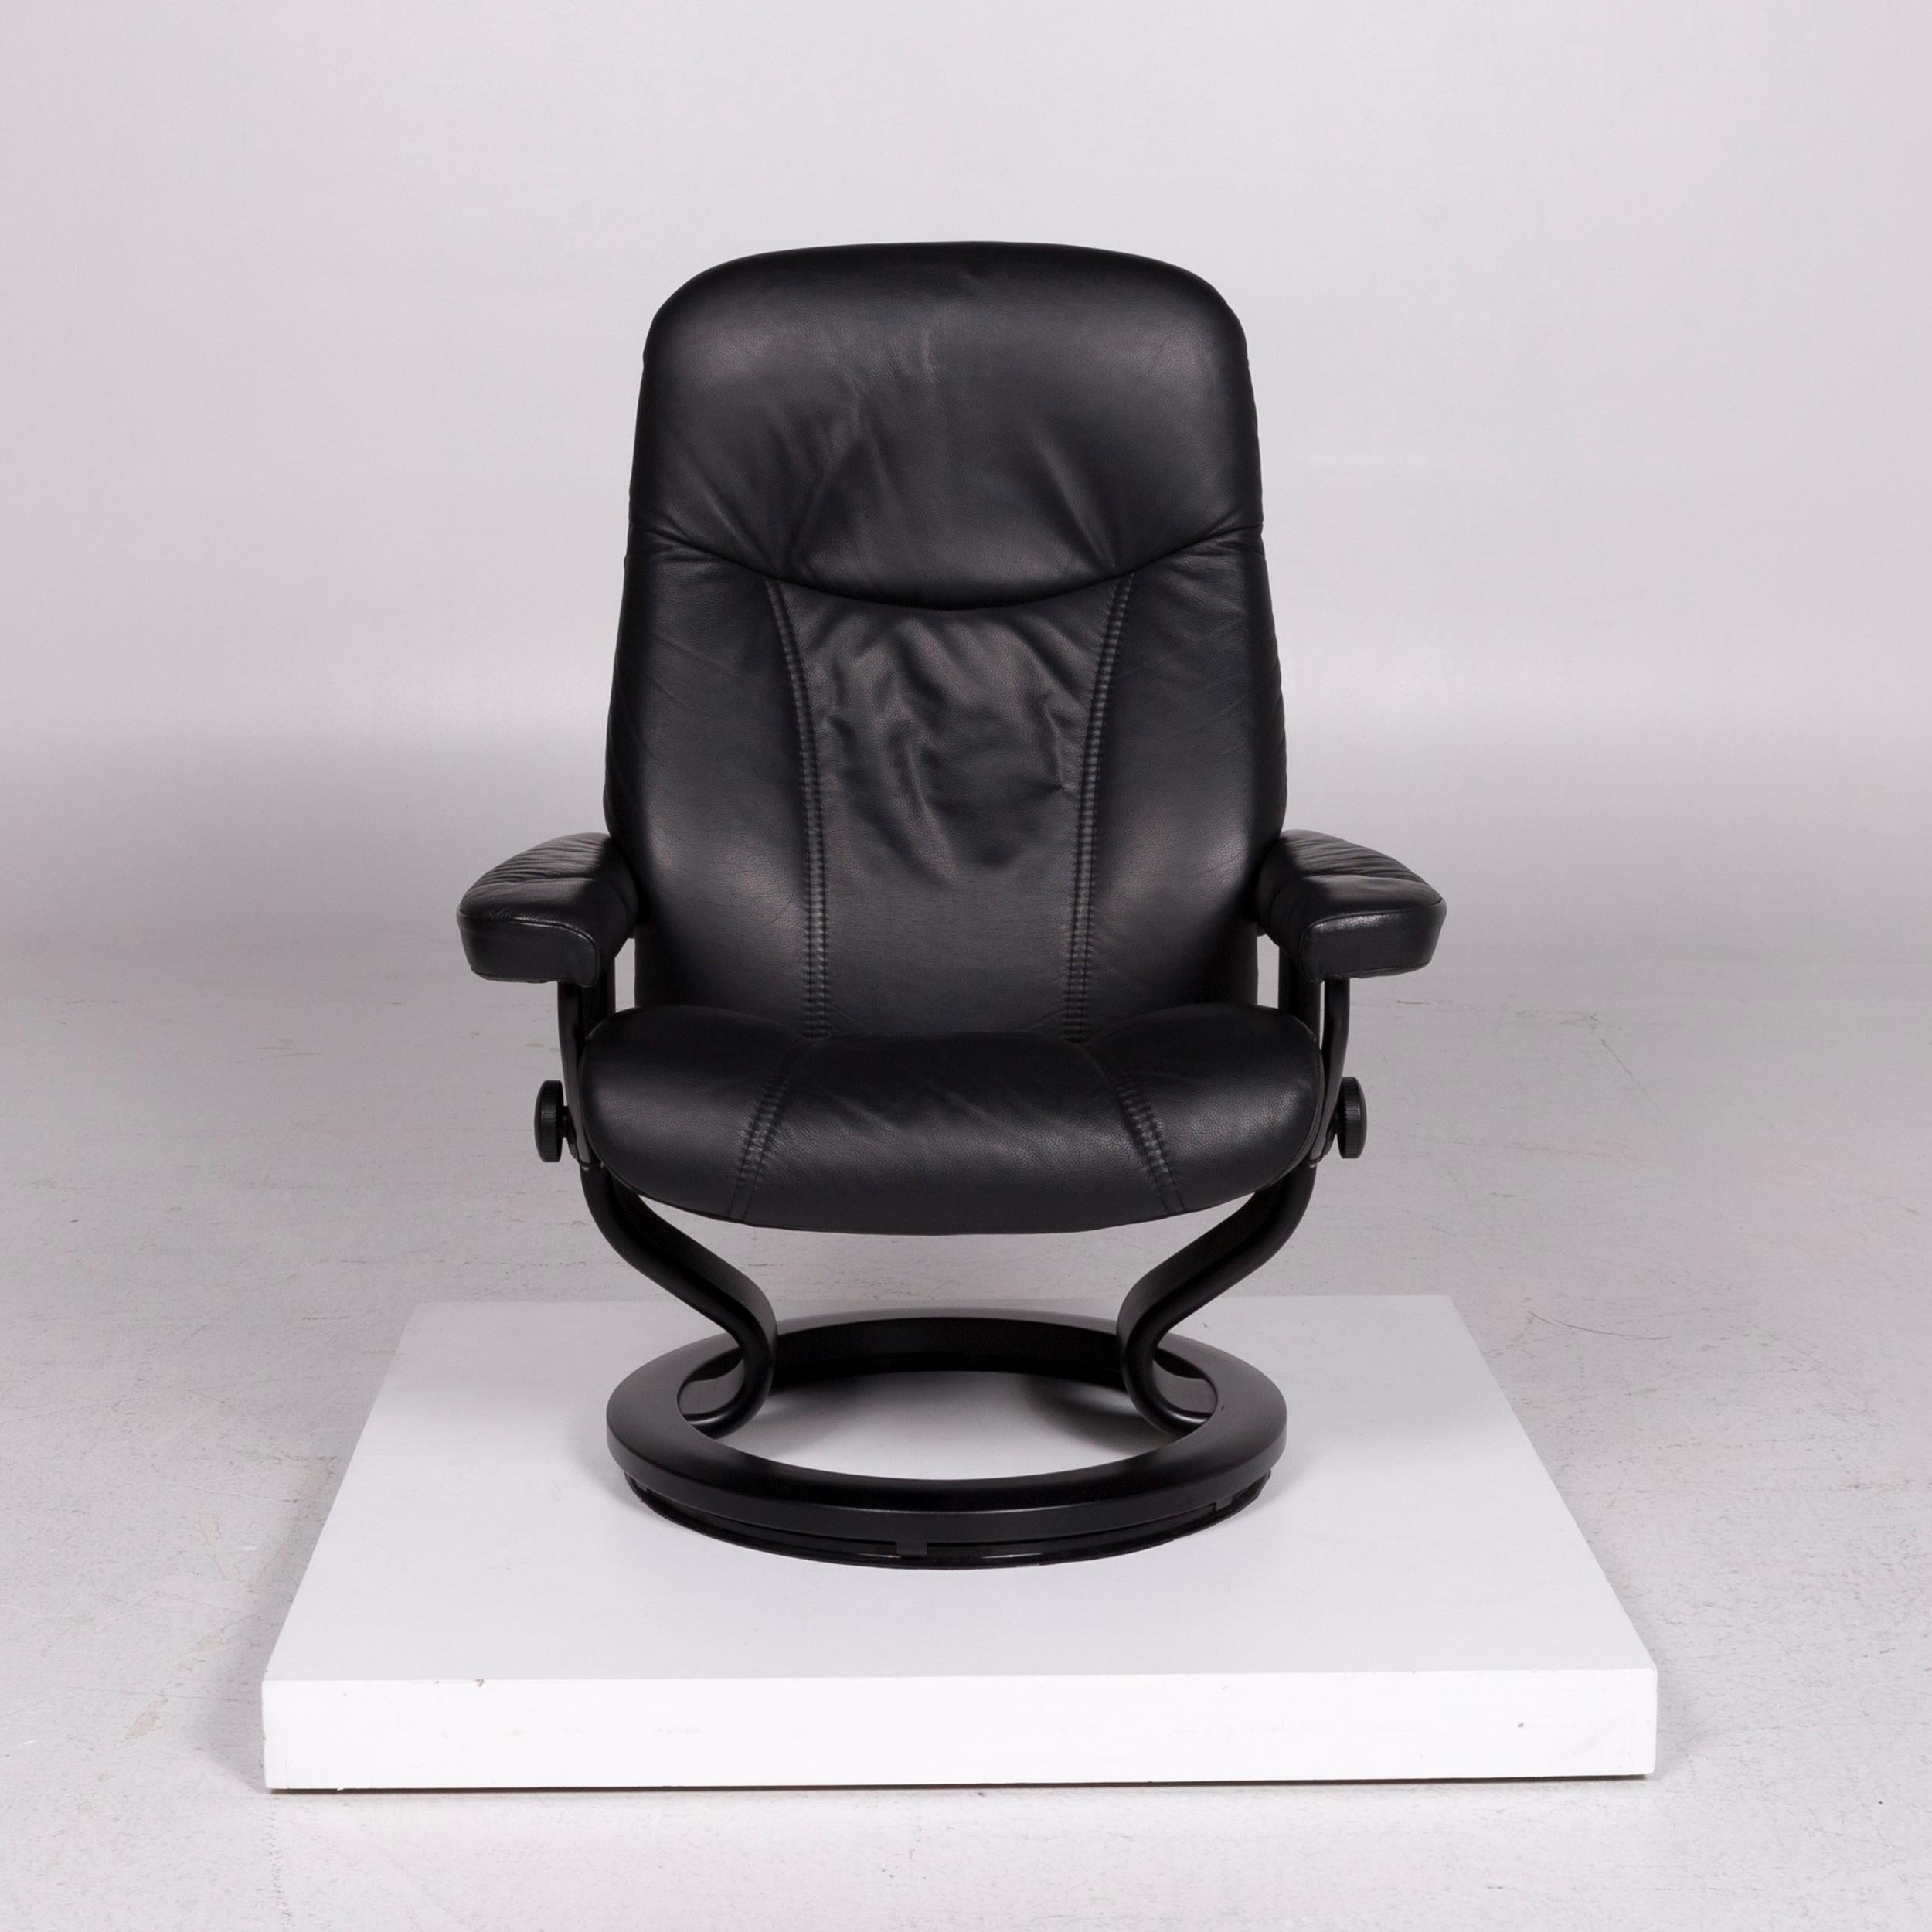 We bring to you a Stressless consul leather armchair black includes stool.

Product measurements in centimetres:
 

Depth 82
Width 75
Height 101
Seat-height 39
Rest-height 51
Seat-depth 46
Seat-width 55
Back-height 67.


   